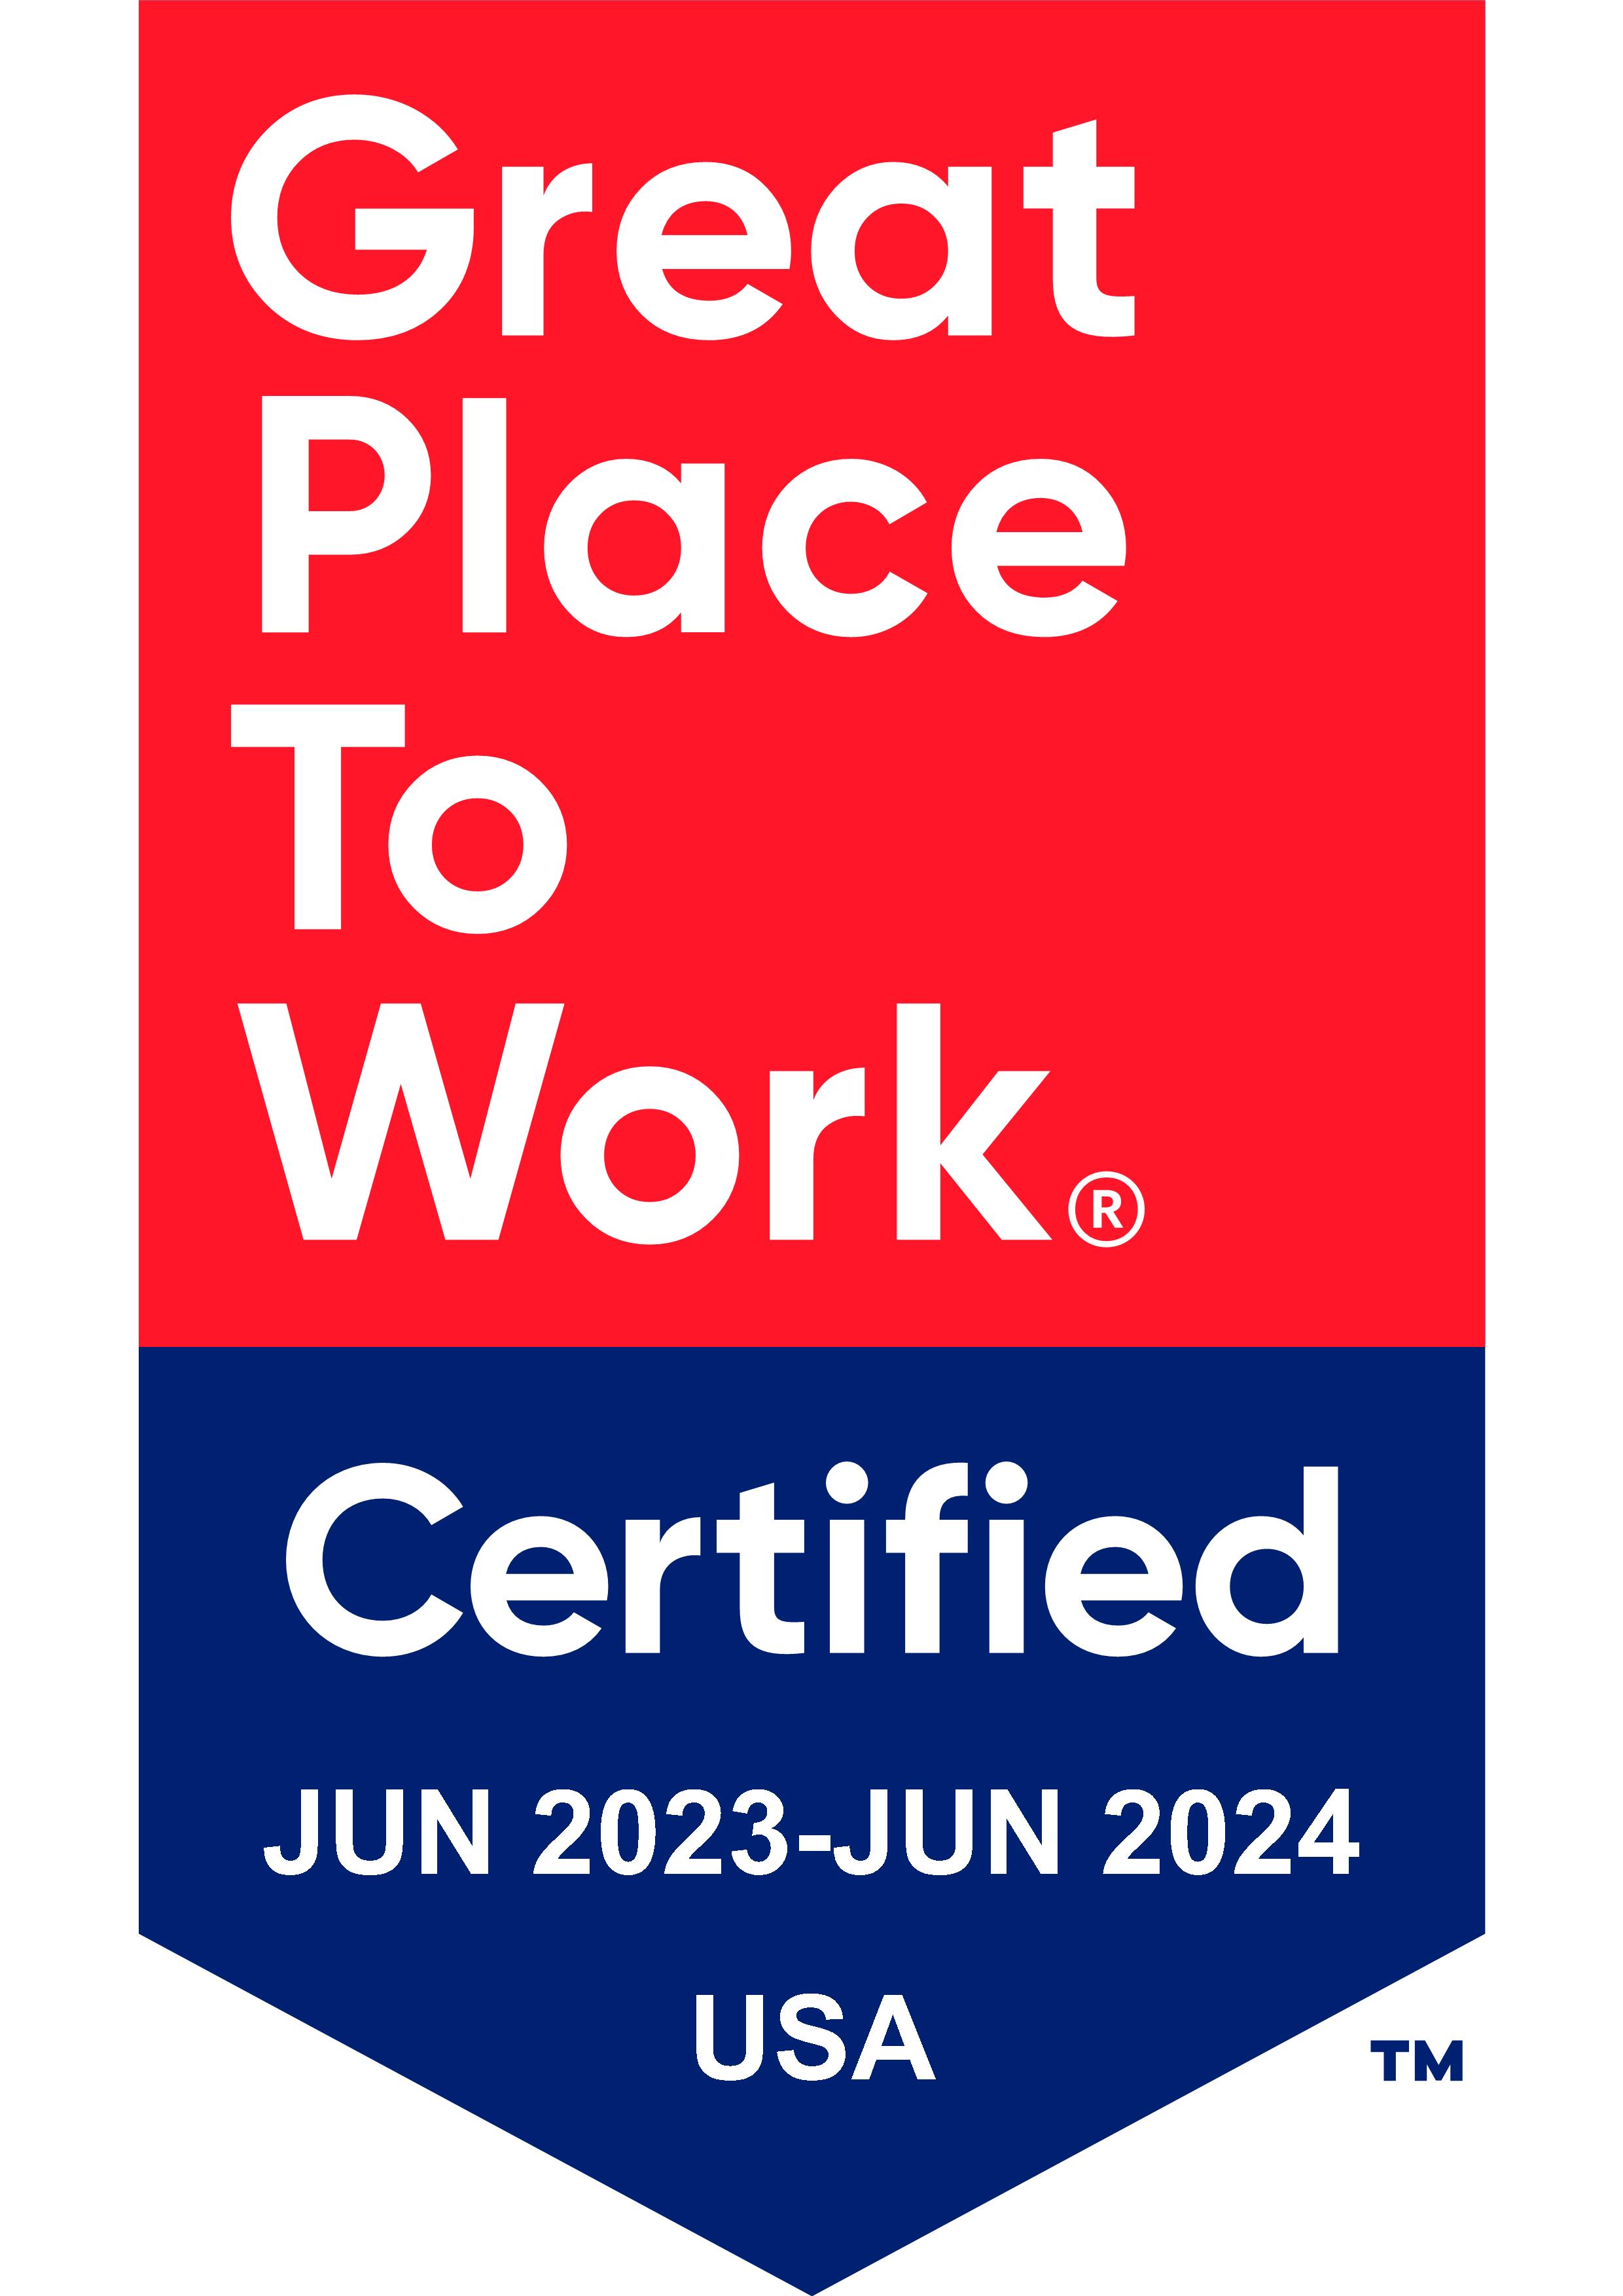 Great Place to Work Certified June 2022 - June 2023